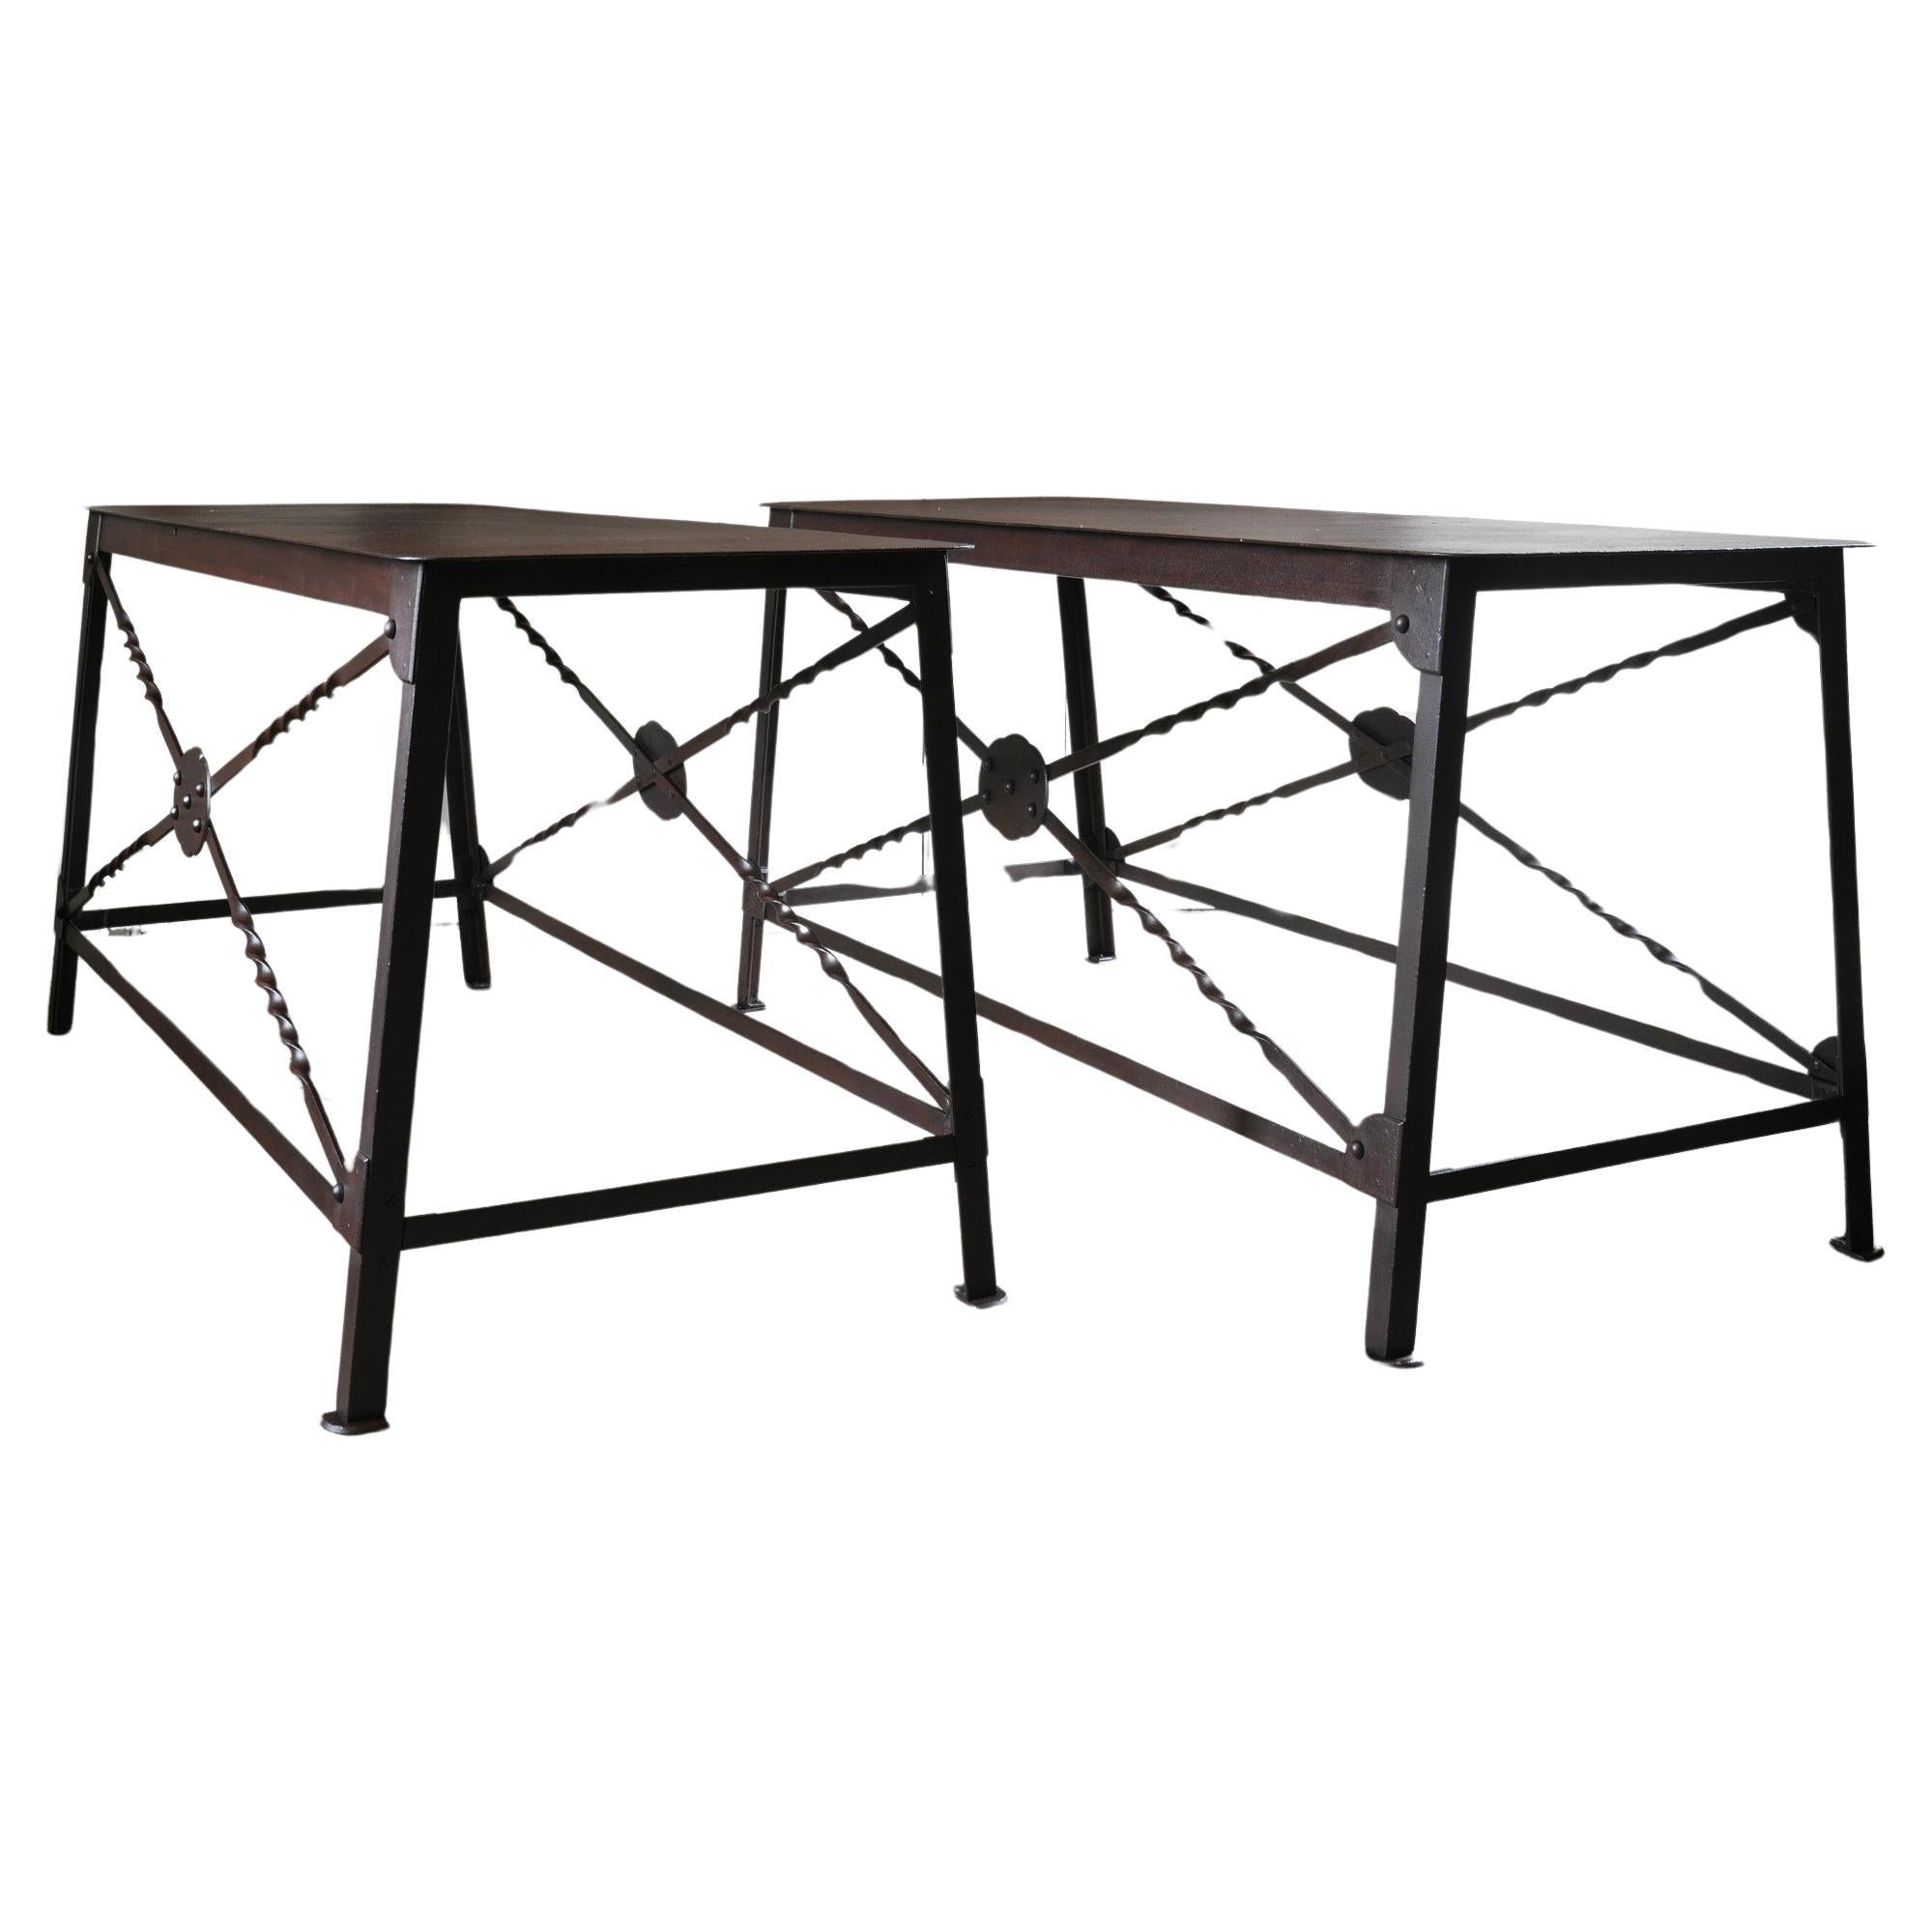 A Pair of Wrought Iron Tables For Sale